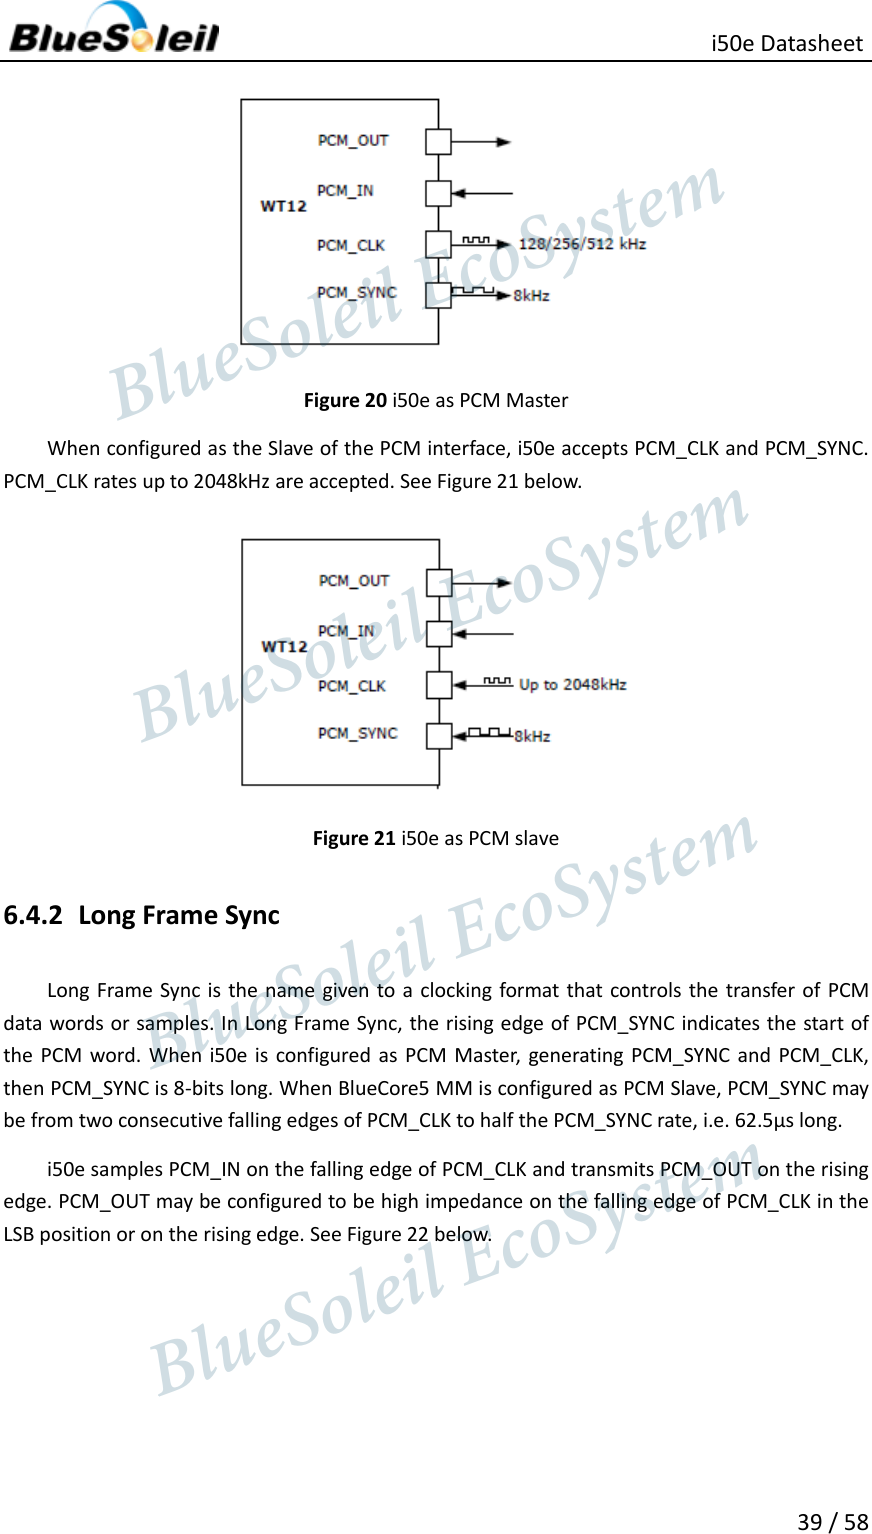                                                   i50e Datasheet 39 / 58  Figure 20 i50e as PCM Master When configured as the Slave of the PCM interface, i50e accepts PCM_CLK and PCM_SYNC. PCM_CLK rates up to 2048kHz are accepted. See Figure 21 below.  Figure 21 i50e as PCM slave 6.4.2 Long Frame Sync Long Frame Sync is  the name given to a clocking format that controls the transfer of  PCM data words or samples. In Long Frame Sync, the rising edge of PCM_SYNC indicates the start of the PCM word. When i50e is configured  as PCM Master,  generating PCM_SYNC and PCM_CLK, then PCM_SYNC is 8-bits long. When BlueCore5 MM is configured as PCM Slave, PCM_SYNC may be from two consecutive falling edges of PCM_CLK to half the PCM_SYNC rate, i.e. 62.5µs long. i50e samples PCM_IN on the falling edge of PCM_CLK and transmits PCM_OUT on the rising edge. PCM_OUT may be configured to be high impedance on the falling edge of PCM_CLK in the LSB position or on the rising edge. See Figure 22 below.                  BlueSoleil EcoSystem            BlueSoleil EcoSystem      BlueSoleil EcoSystemBlueSoleil EcoSystem